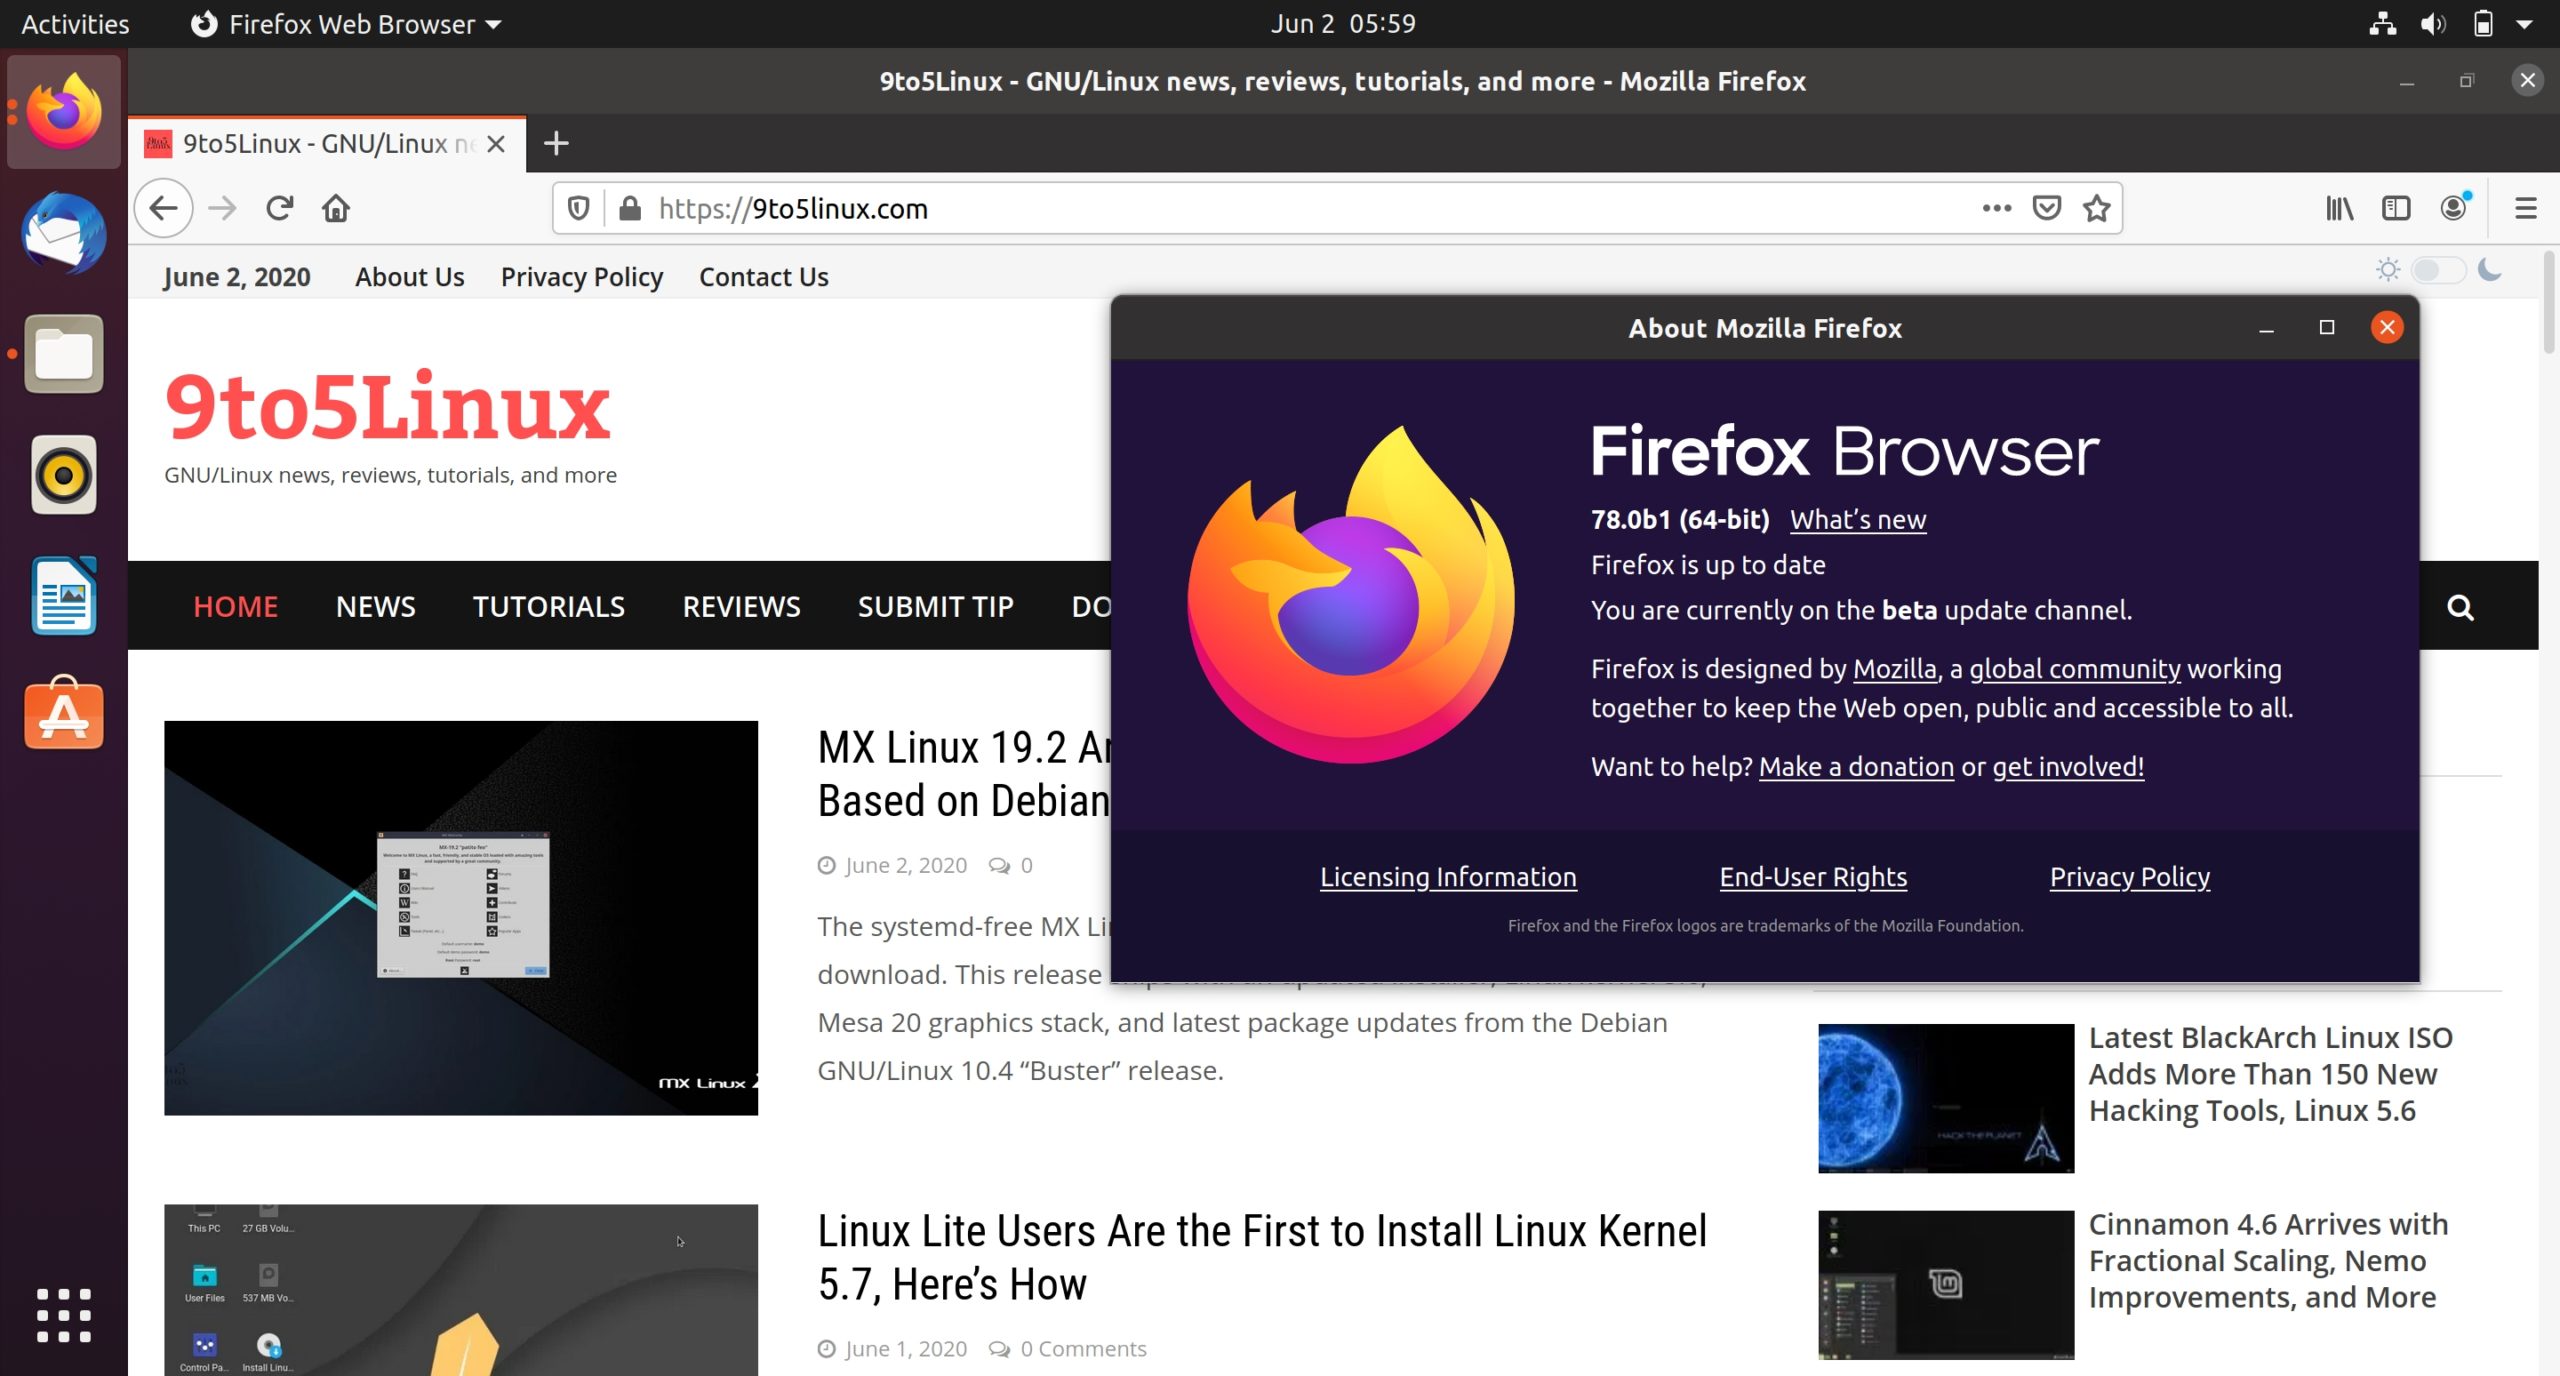 Mozilla Firefox 78 Enters Beta with Updated Minimal Linux System Requirements